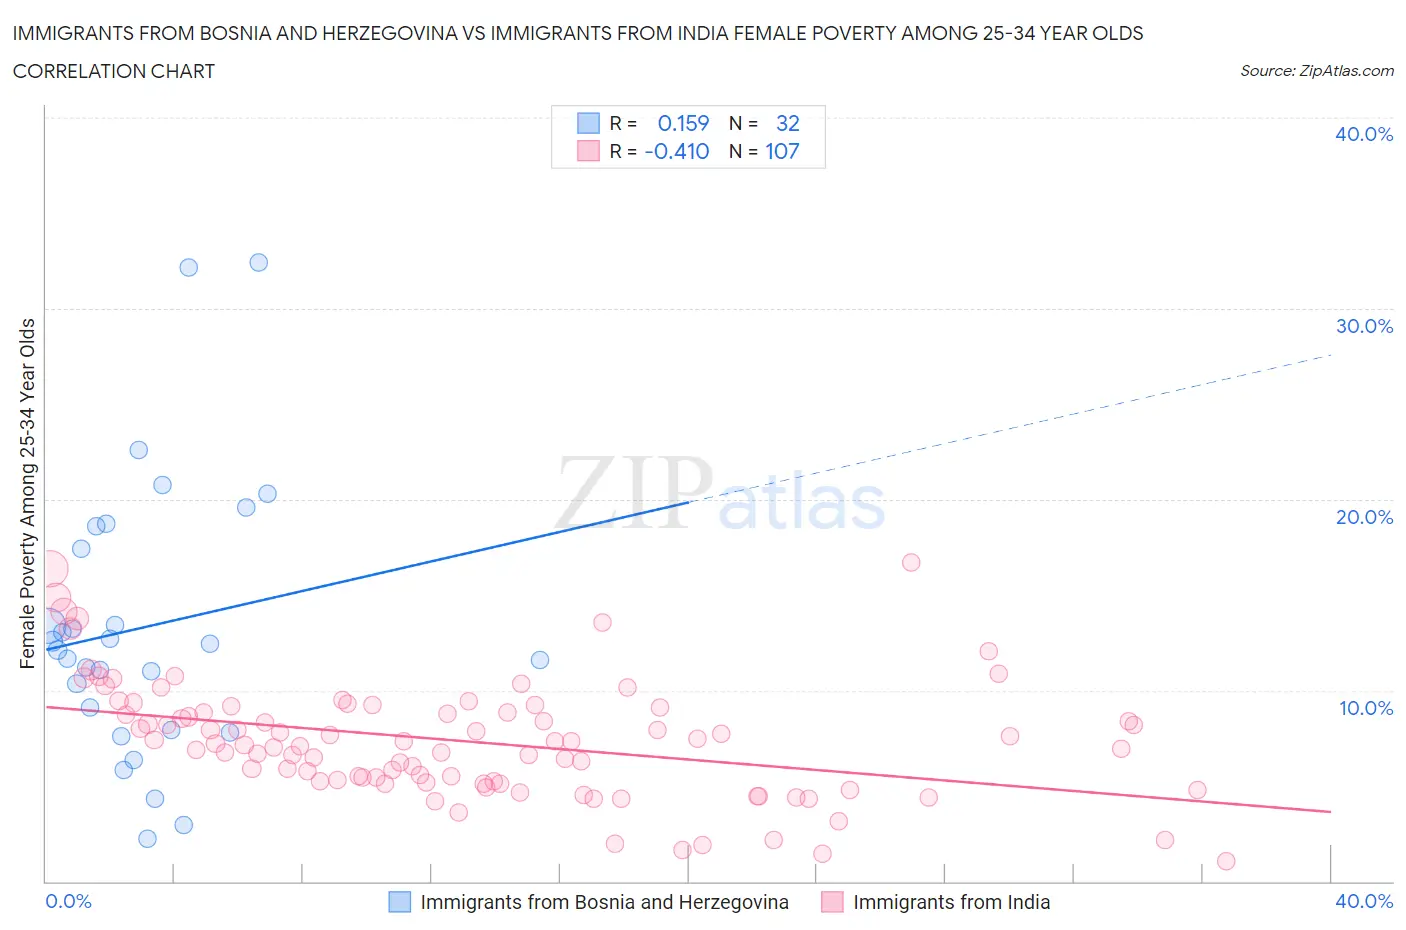 Immigrants from Bosnia and Herzegovina vs Immigrants from India Female Poverty Among 25-34 Year Olds